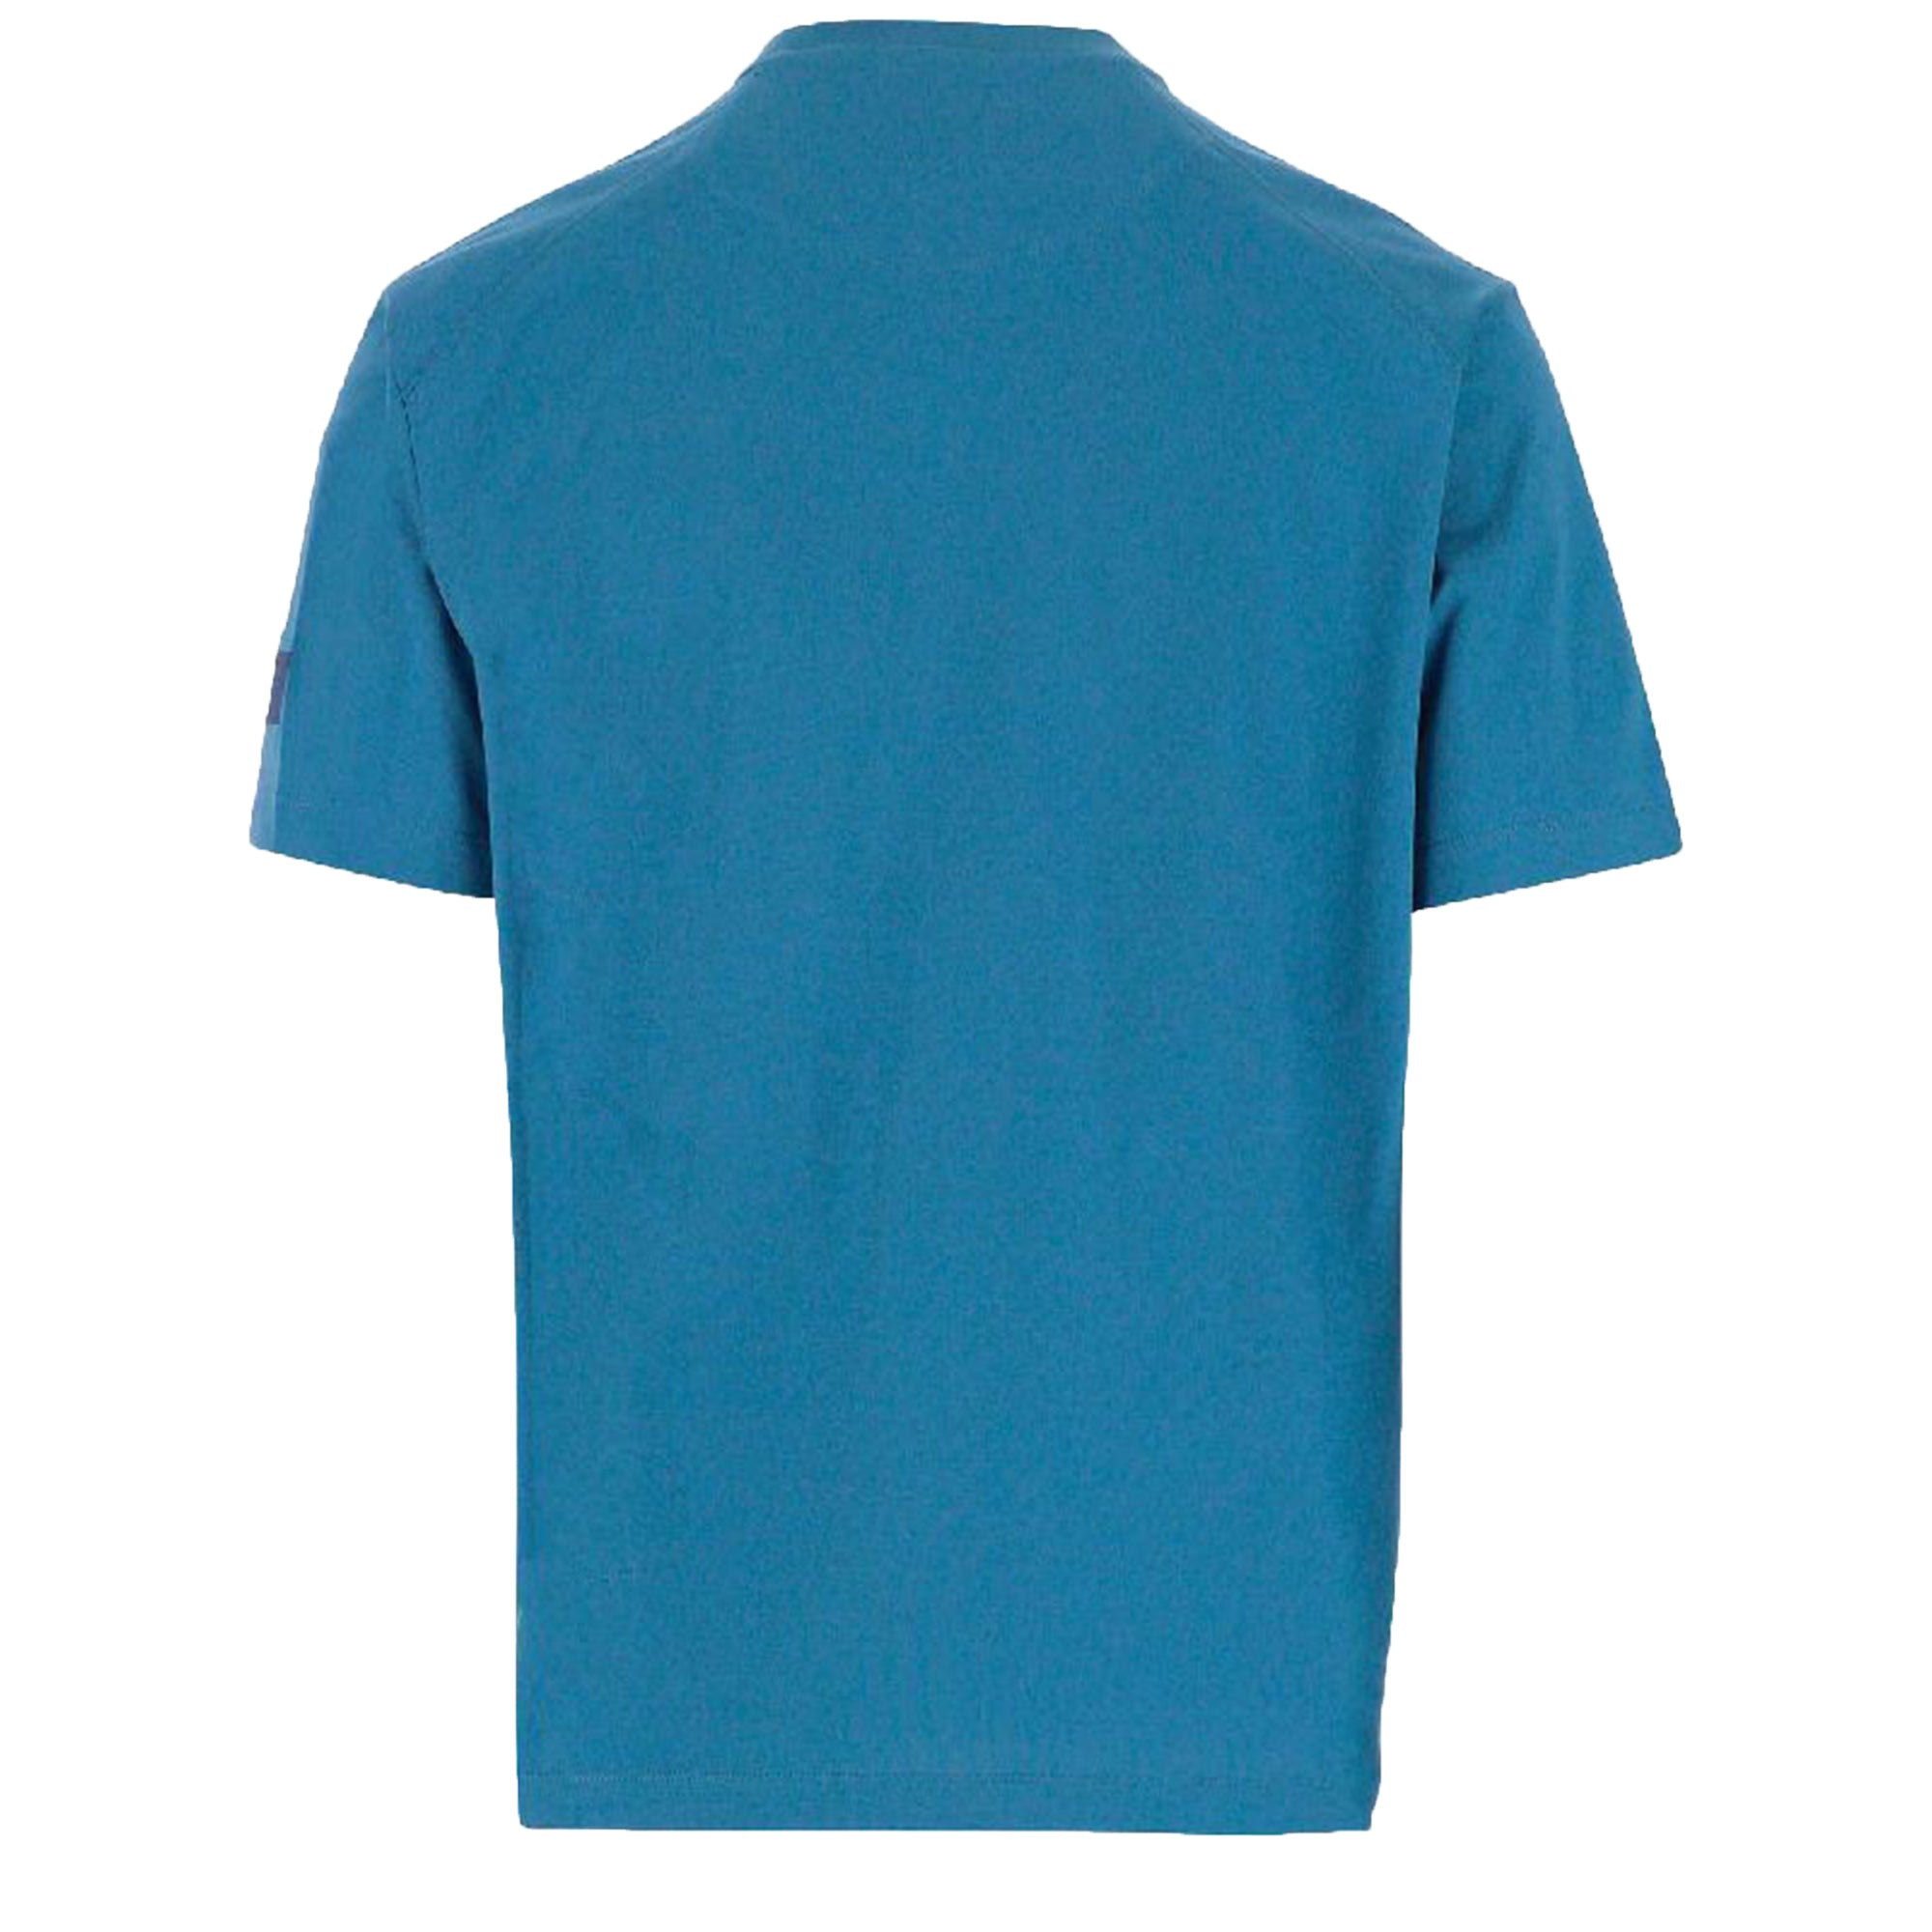 Relaxed SS TEE Altblu X Small